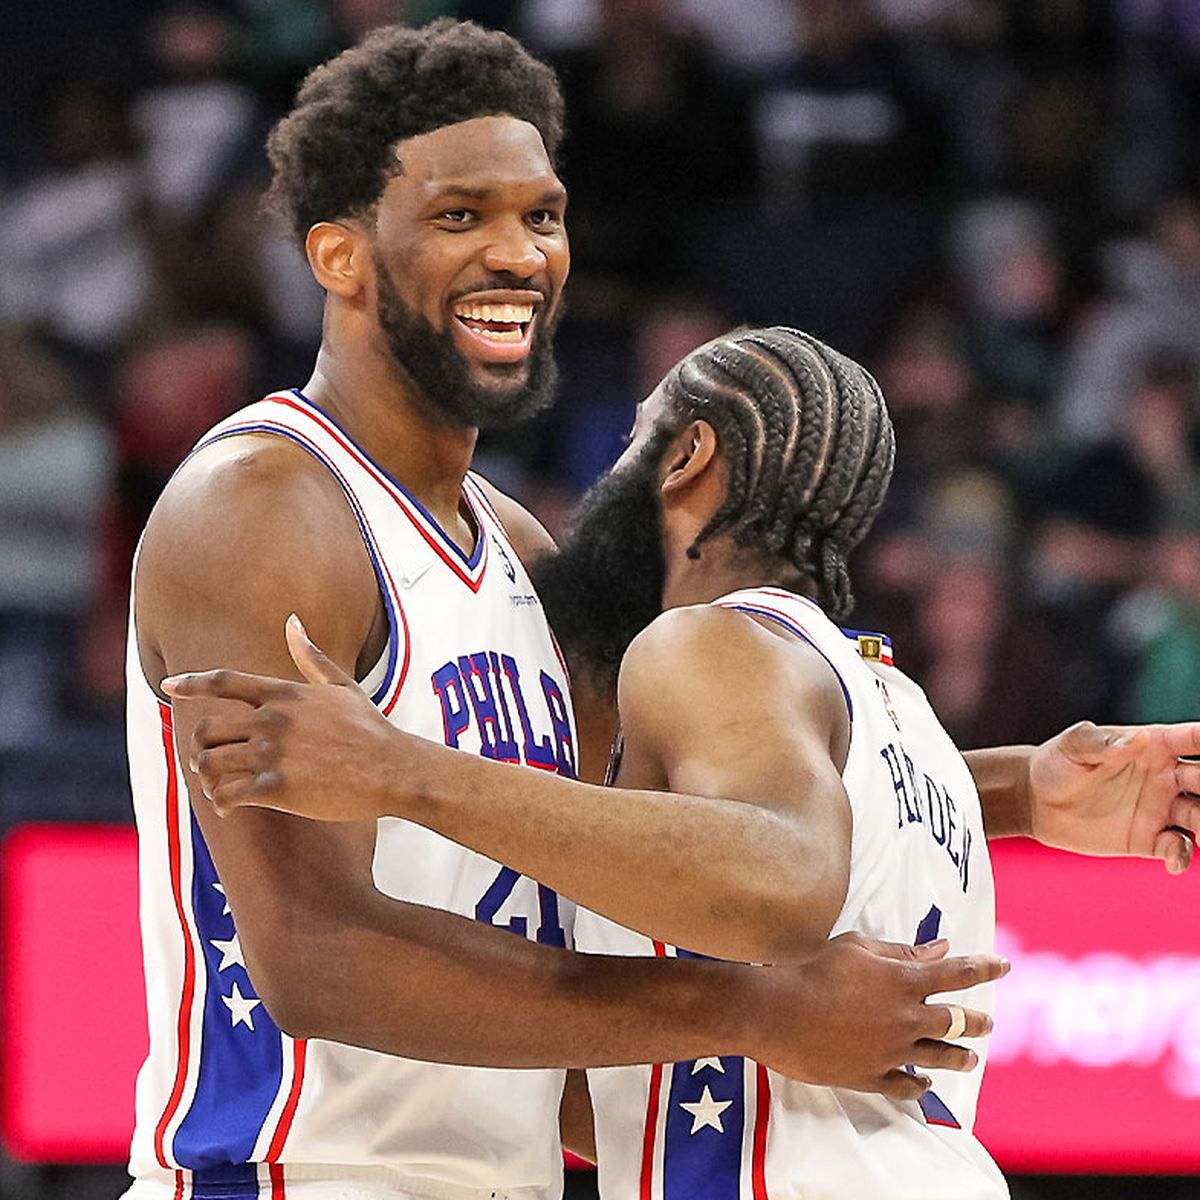 Joel Embiid starred on the court for the All-Star Game as Sixers